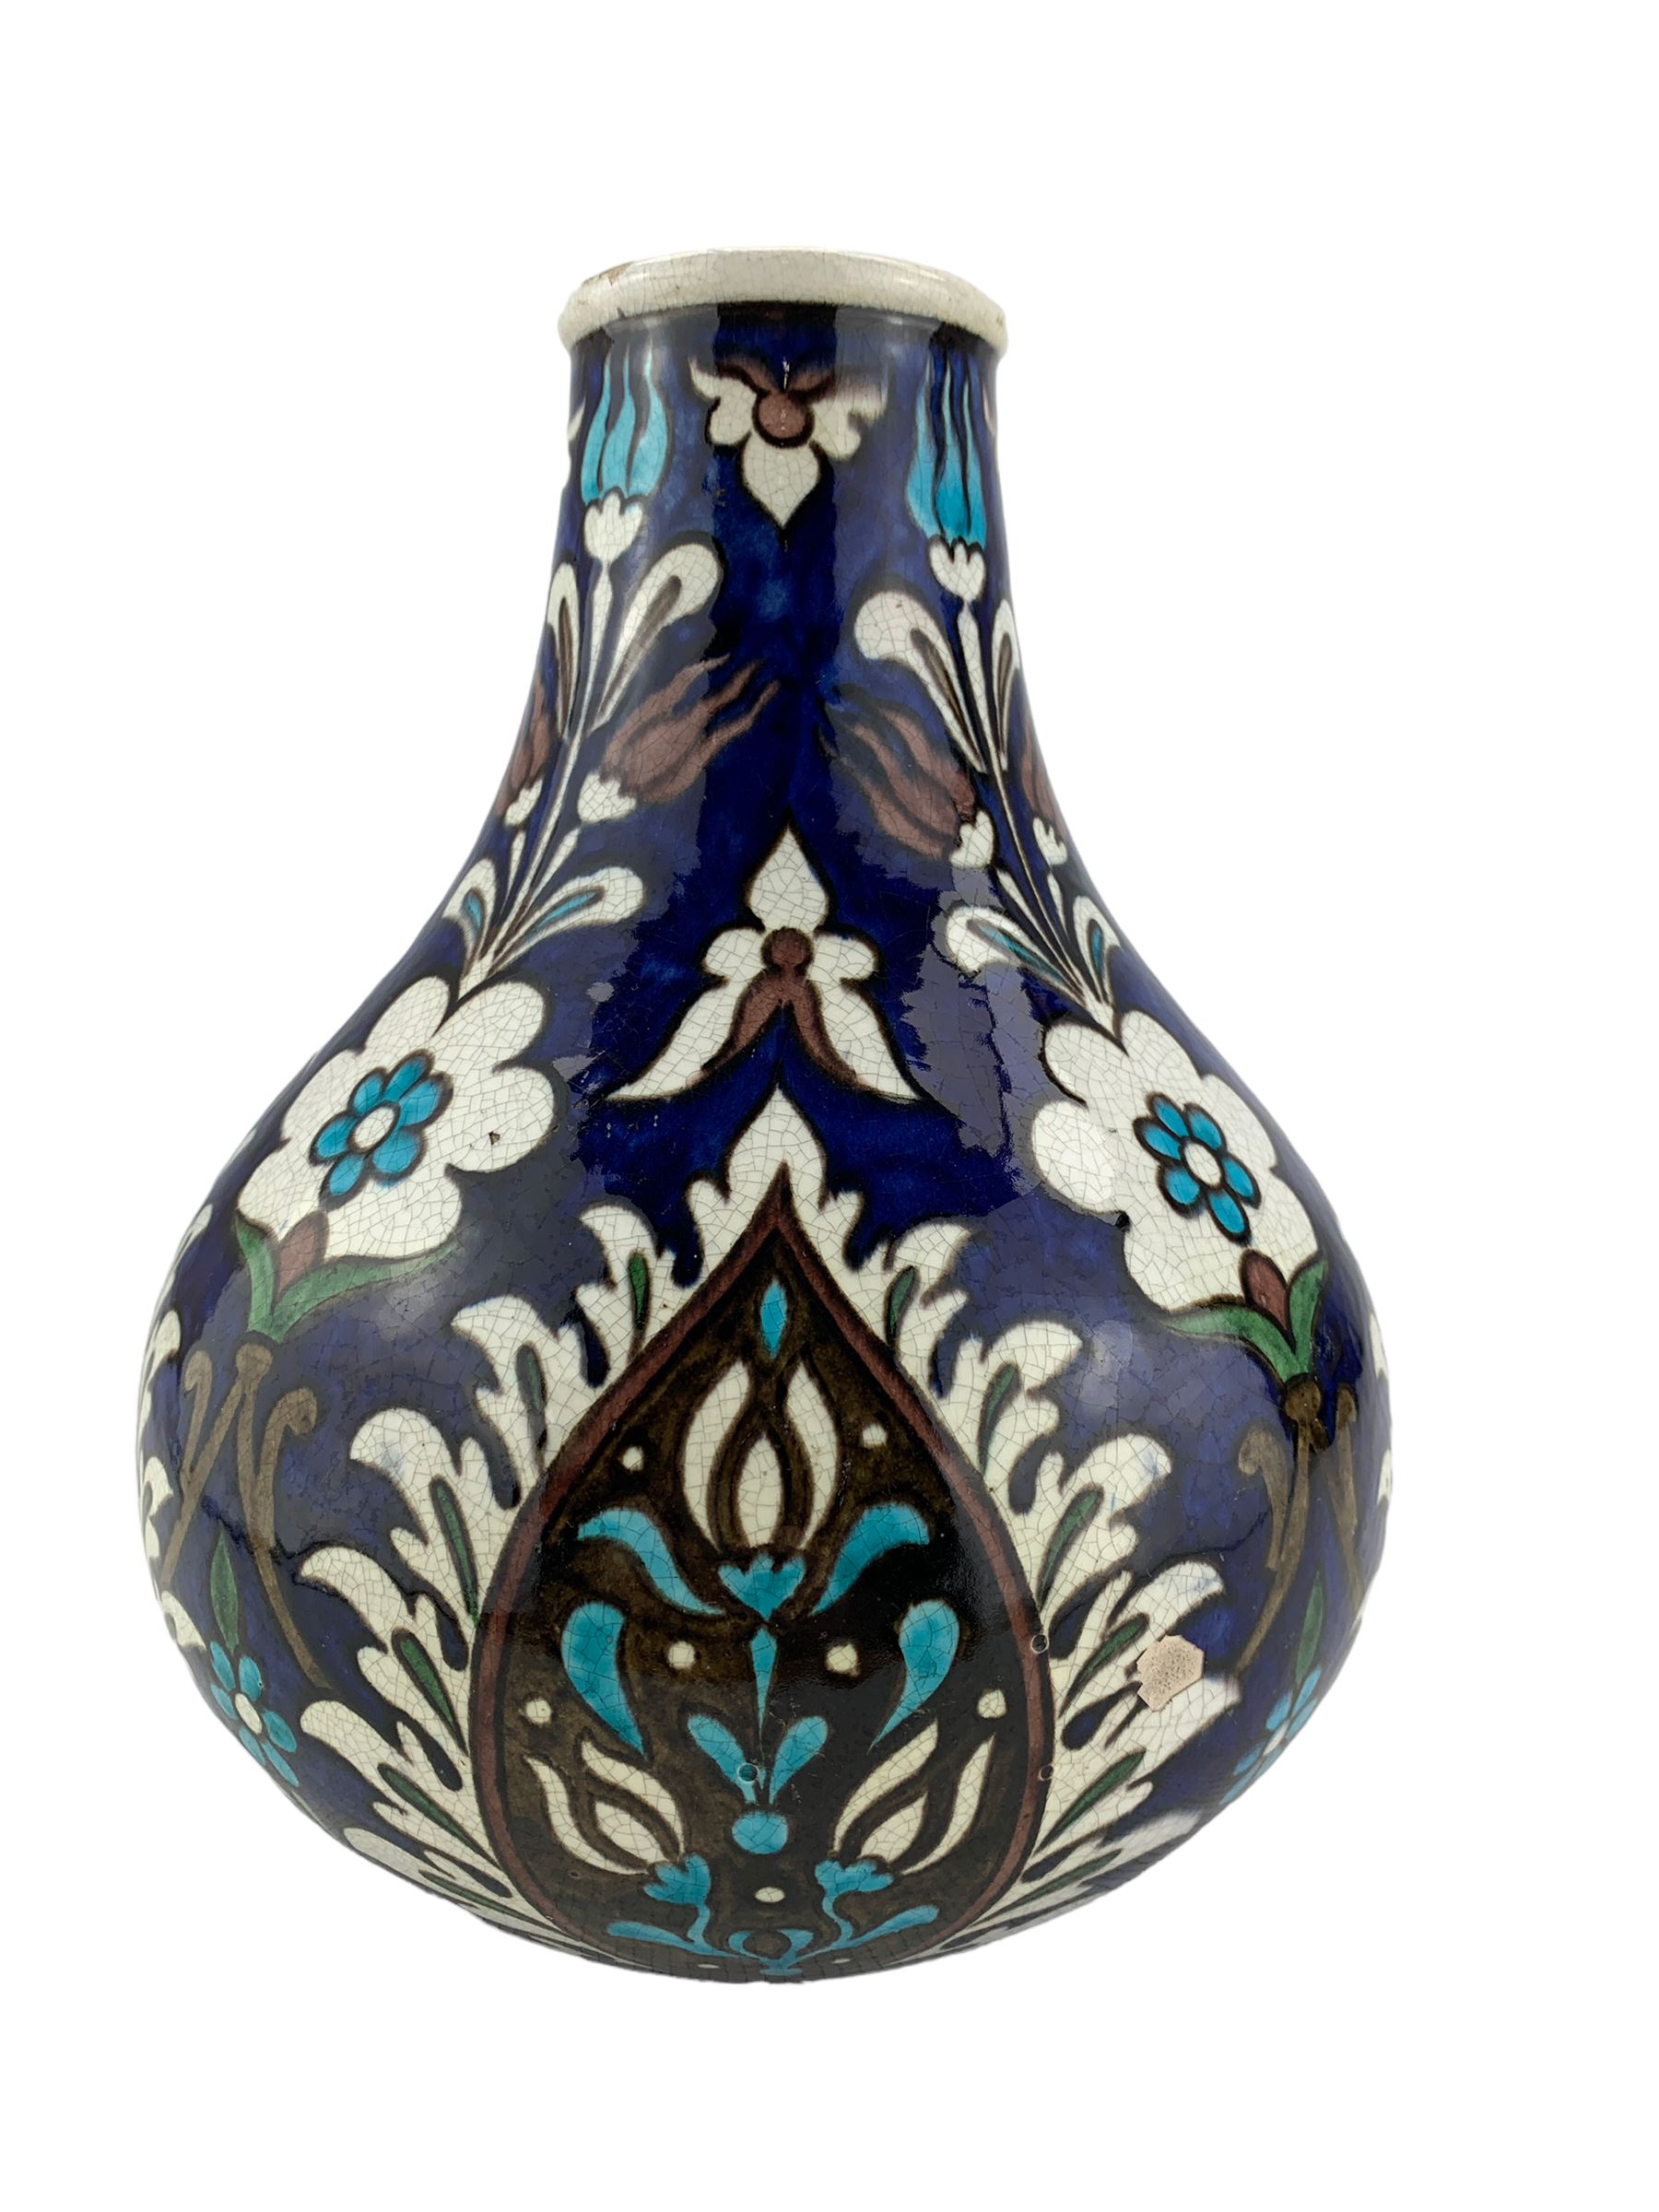 Burmantofts Faience Anglo-Persian bottle vase - Image 2 of 7